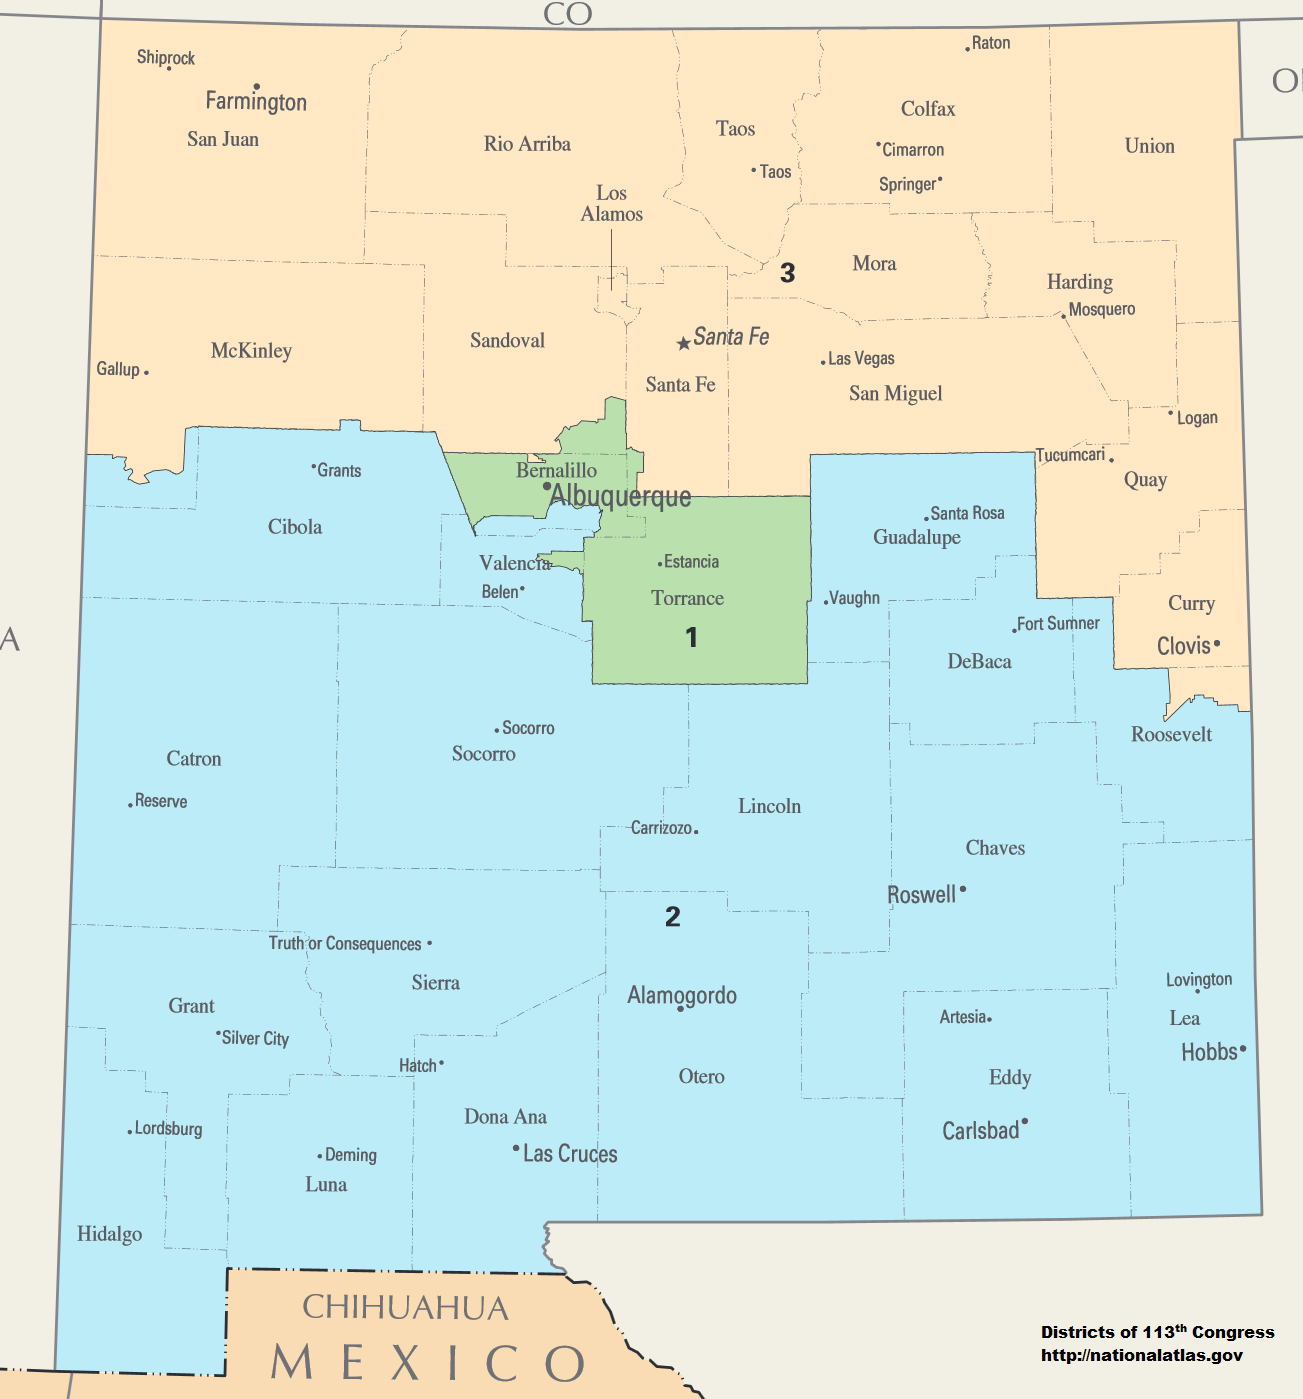 Image New Mexico Congressional Districts, 113th Congress